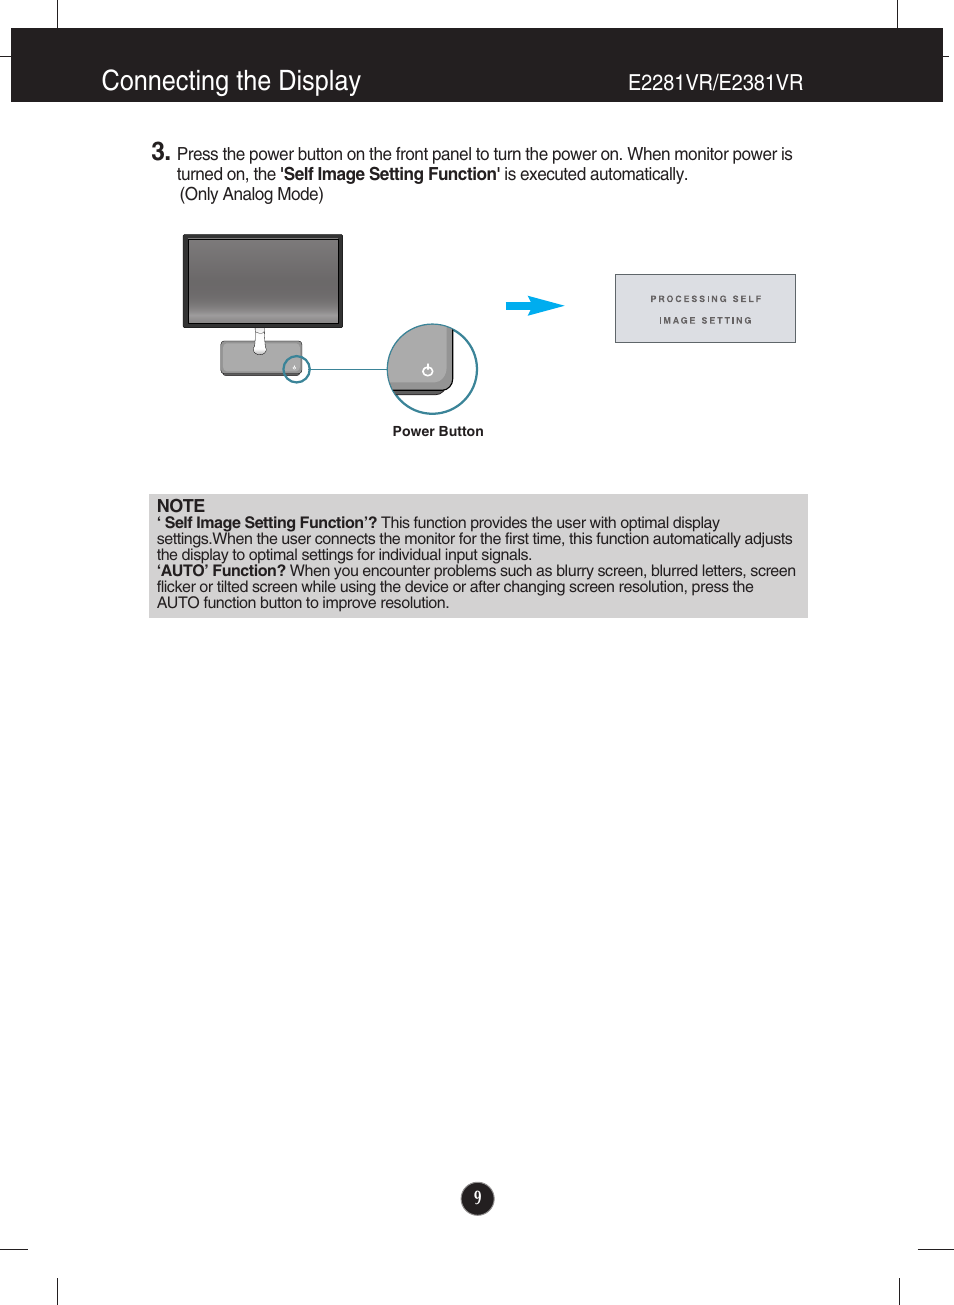 Connecting the display | LG E2281VR-BN User Manual | Page 10 / 35